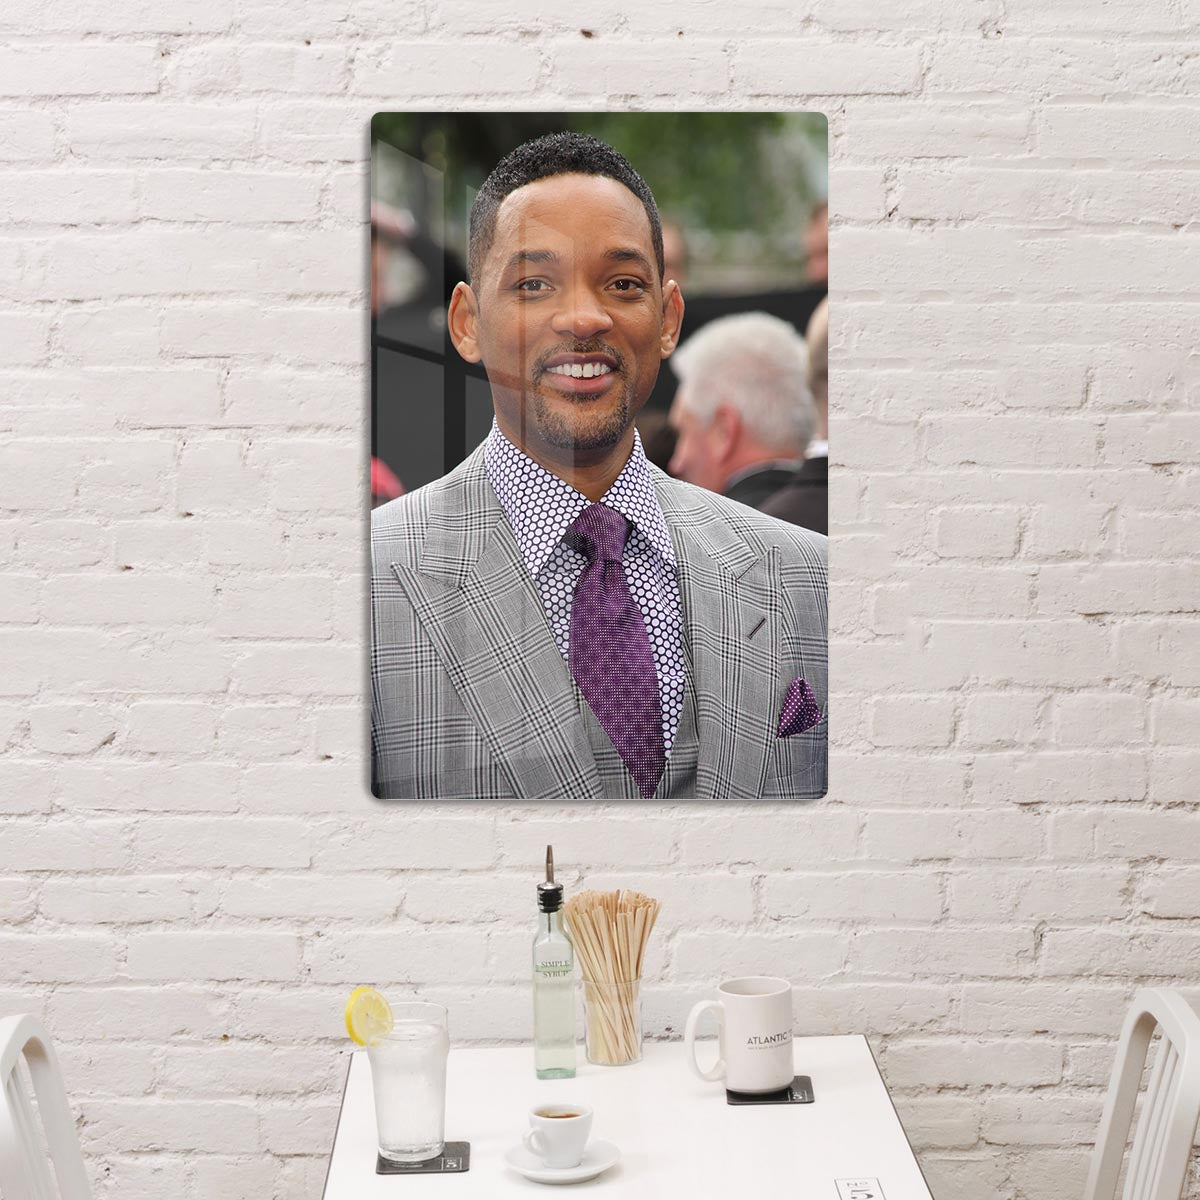 Will Smith In Suit HD Metal Print